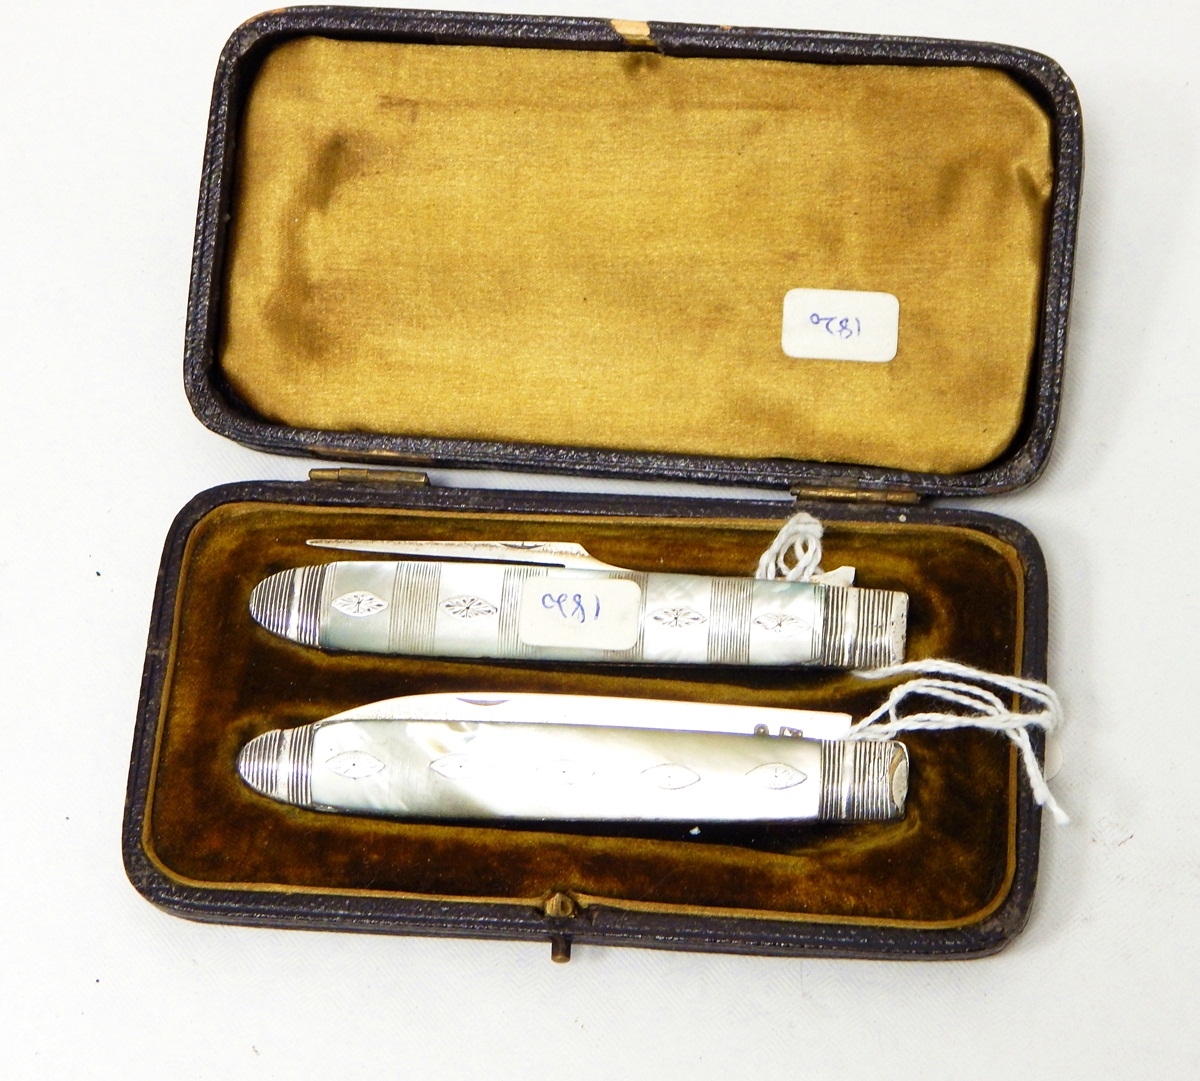 A Georgian silver knife and folding fork set with mother-of-pearl handles, insert metal decorations,